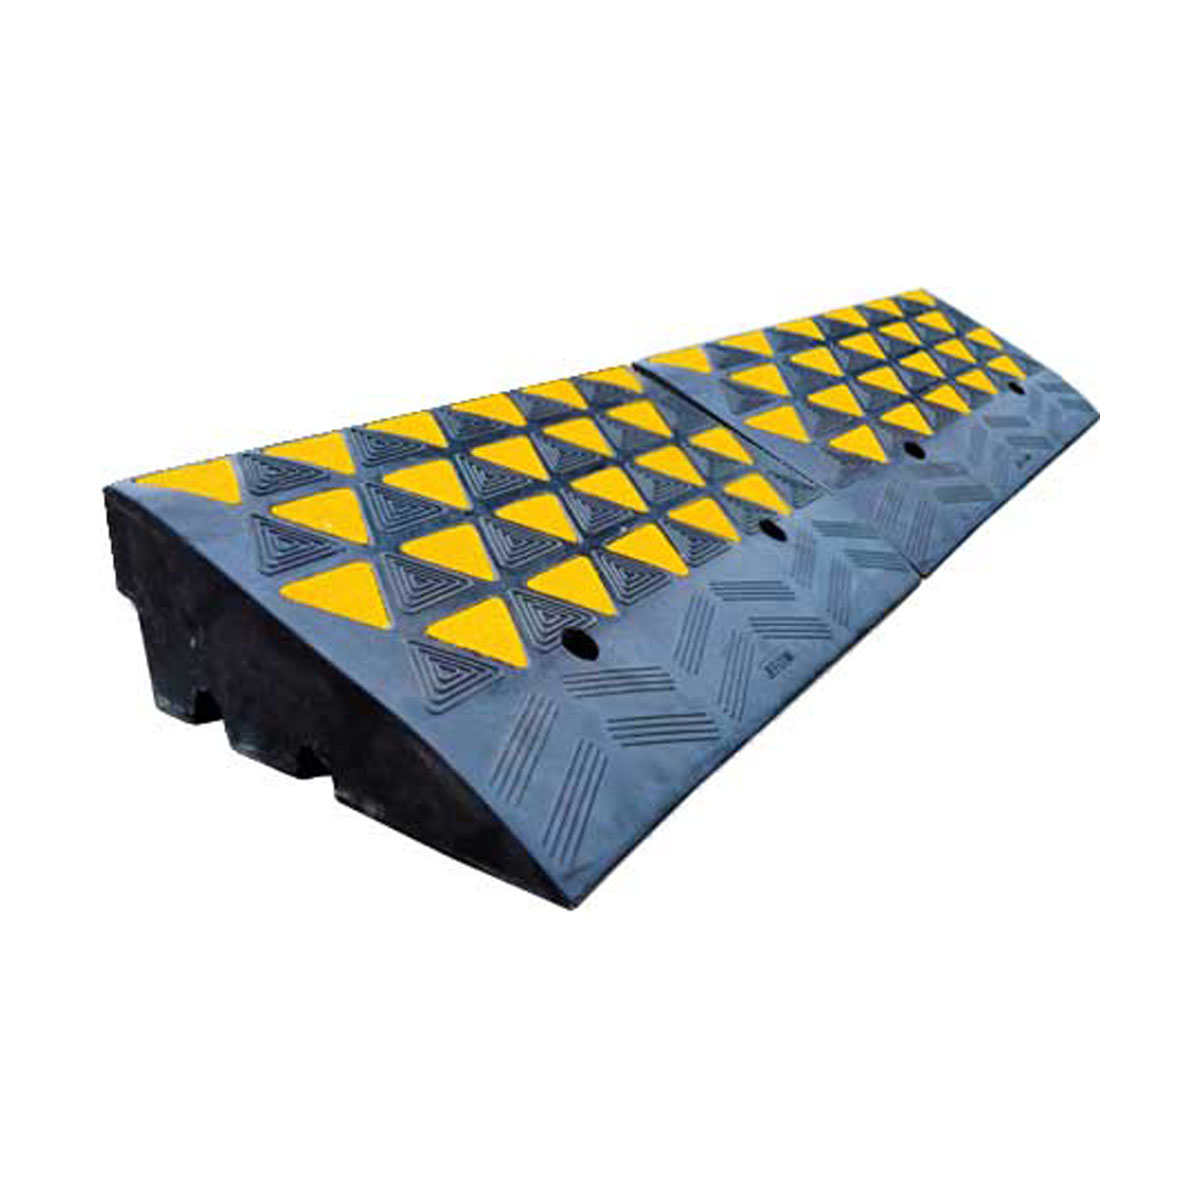 Buy Reflective Kerb Ramp | Heavy Duty Rubber in Kerb Ramps available at Astrolift NZ